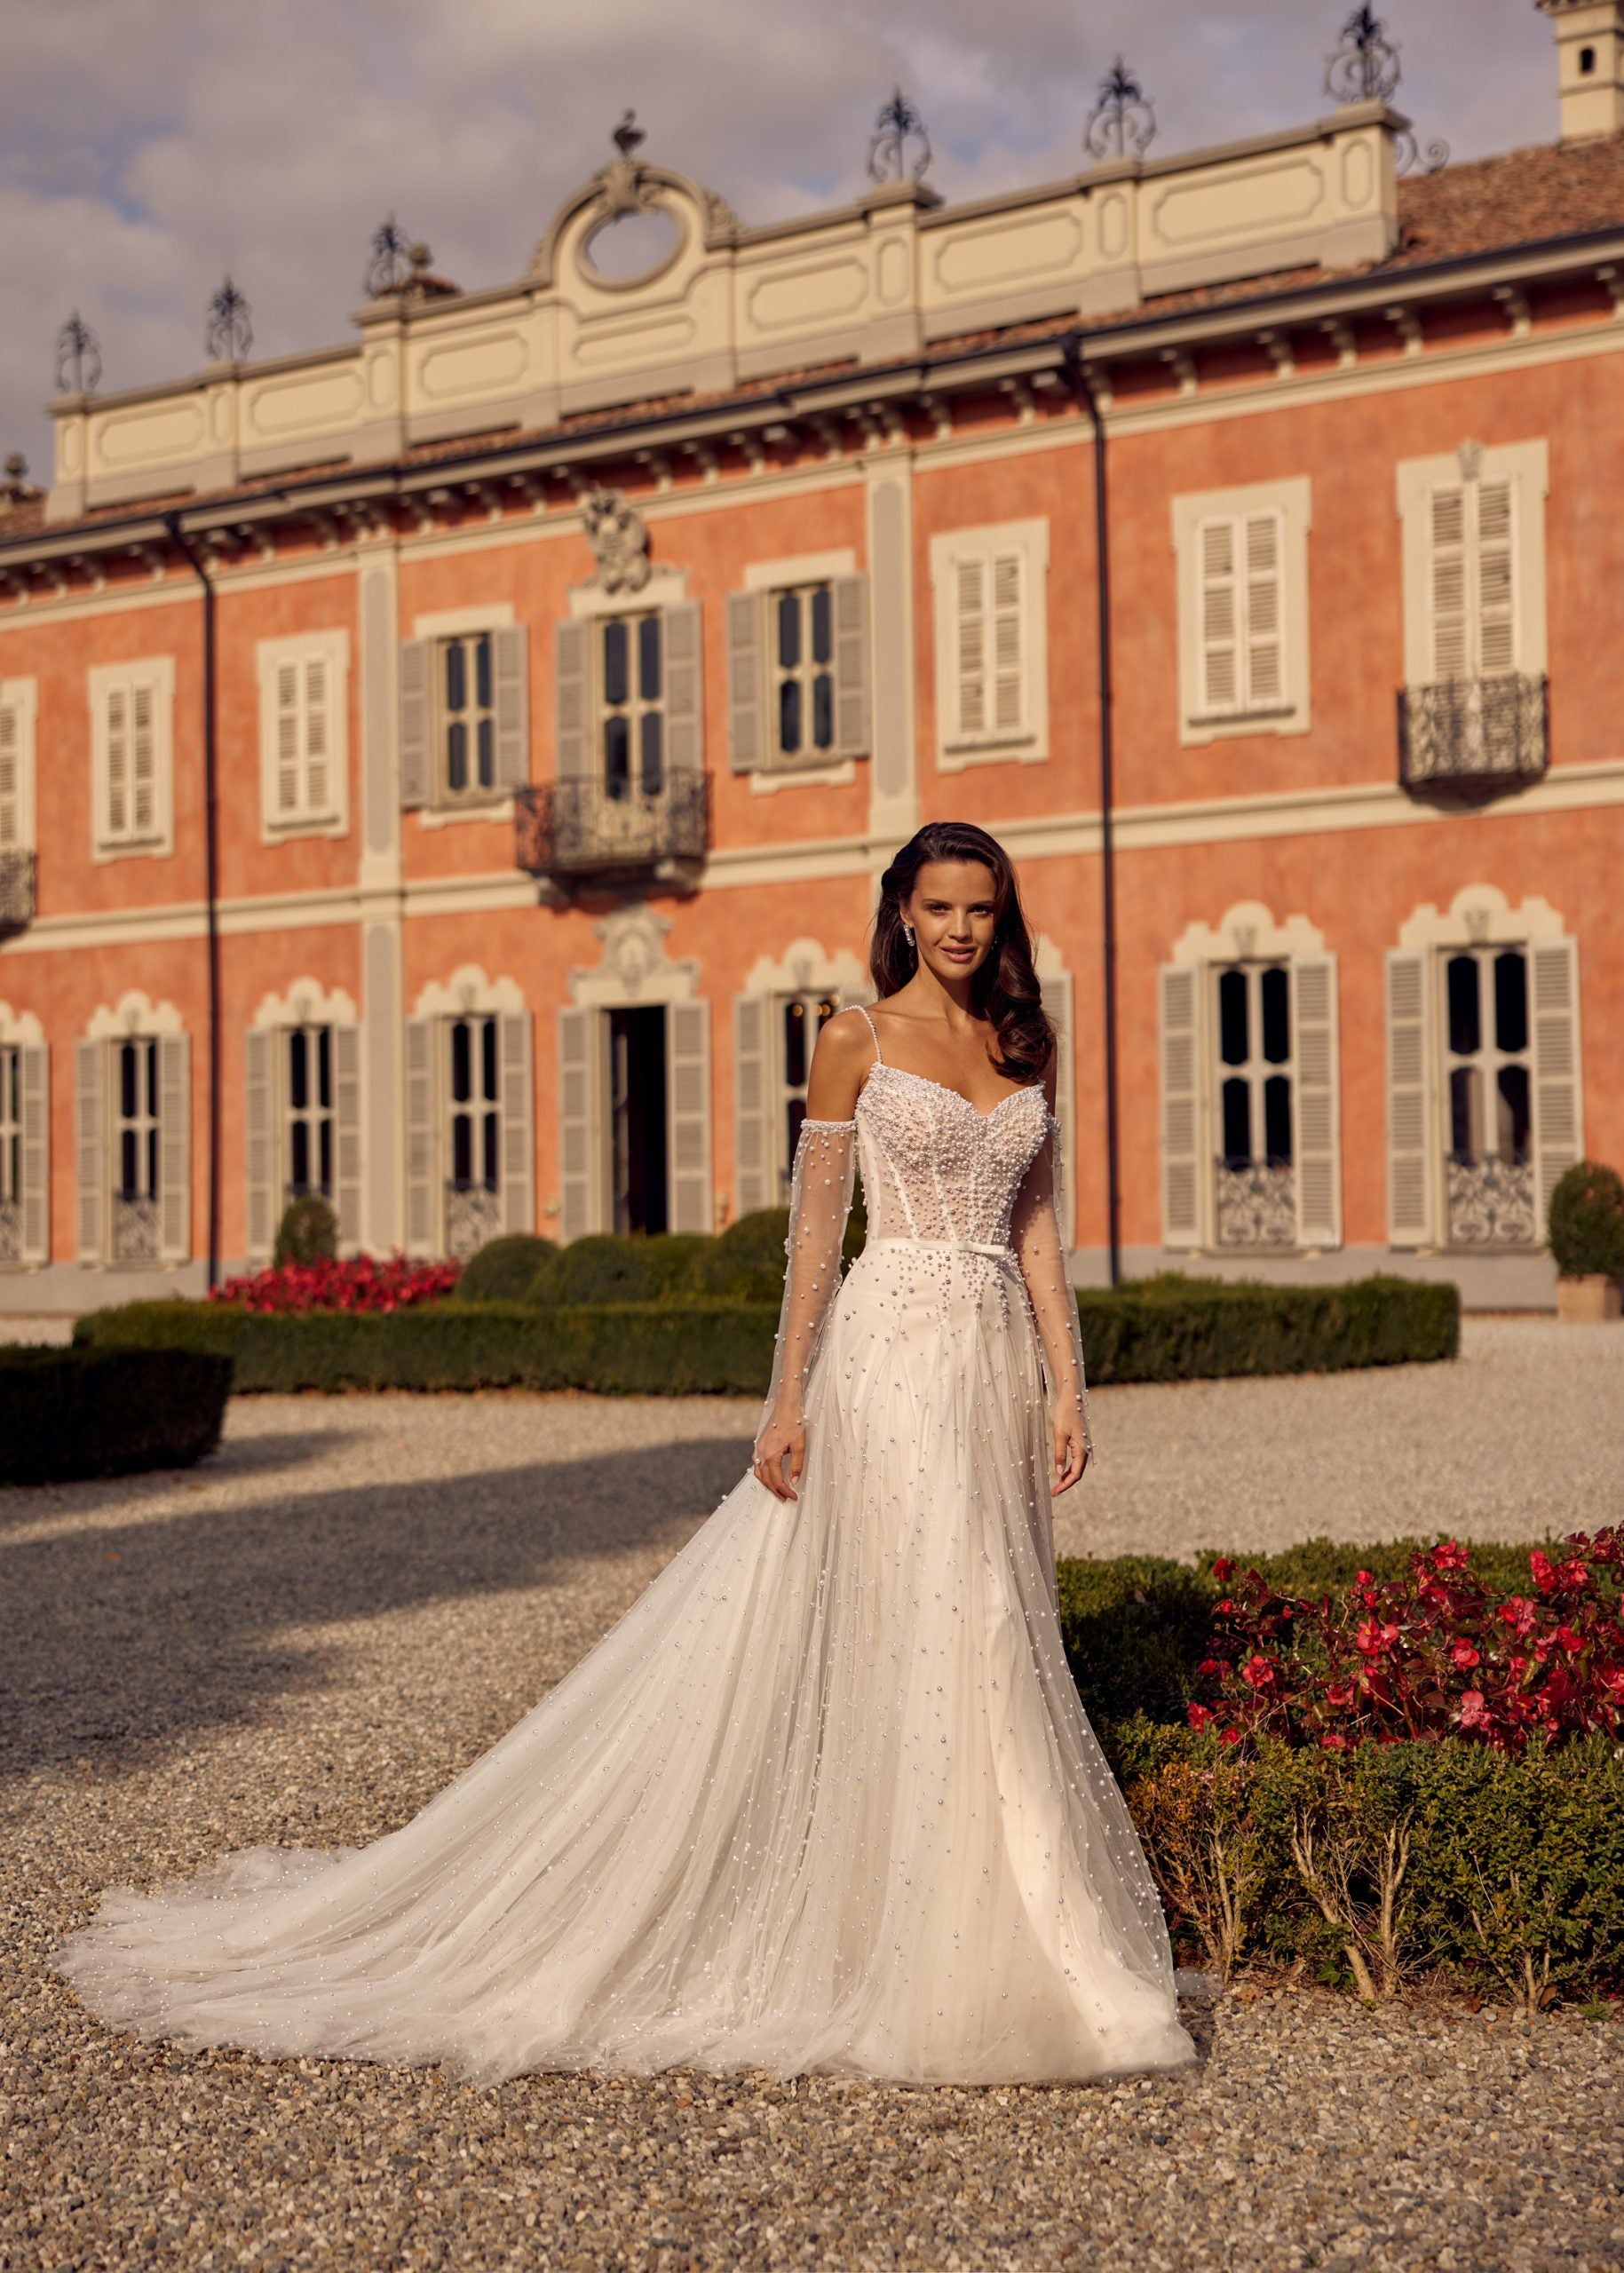 Pearl-Embellished A-Line Gown With Detachable Sleeves by Randy Fenoli - Image 1